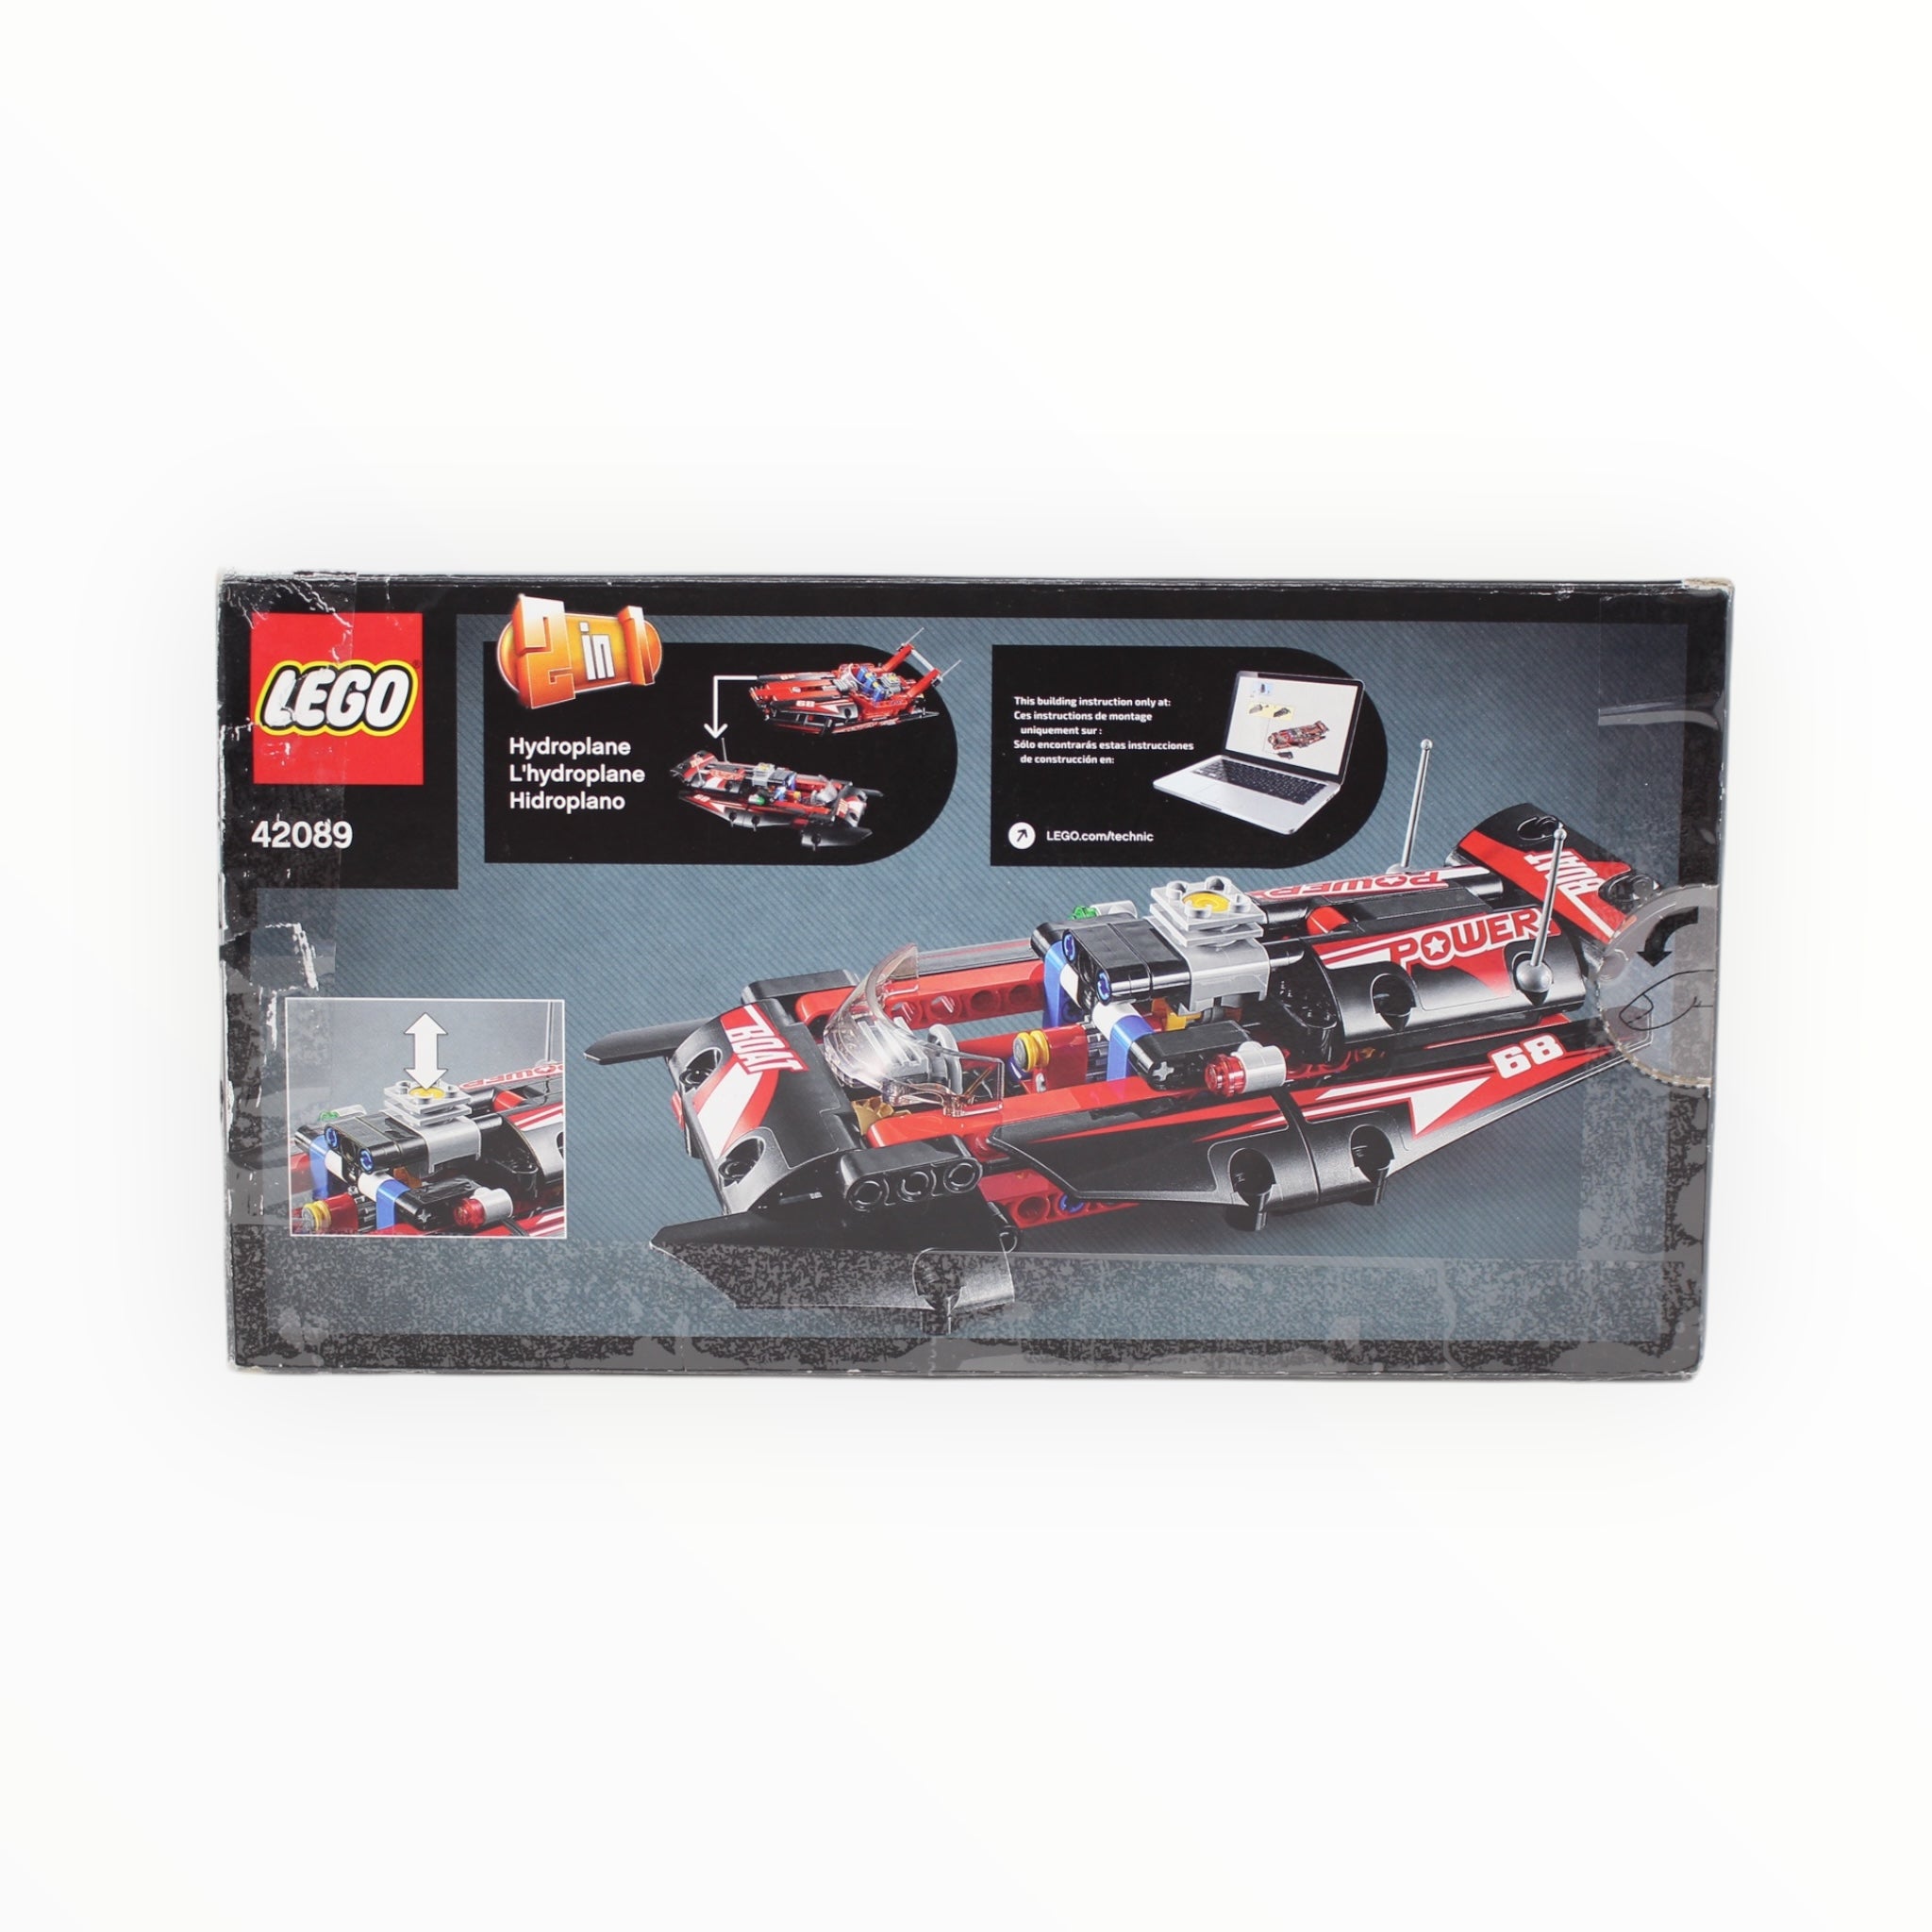 Certified Used Set 42089 Technic Power Boat